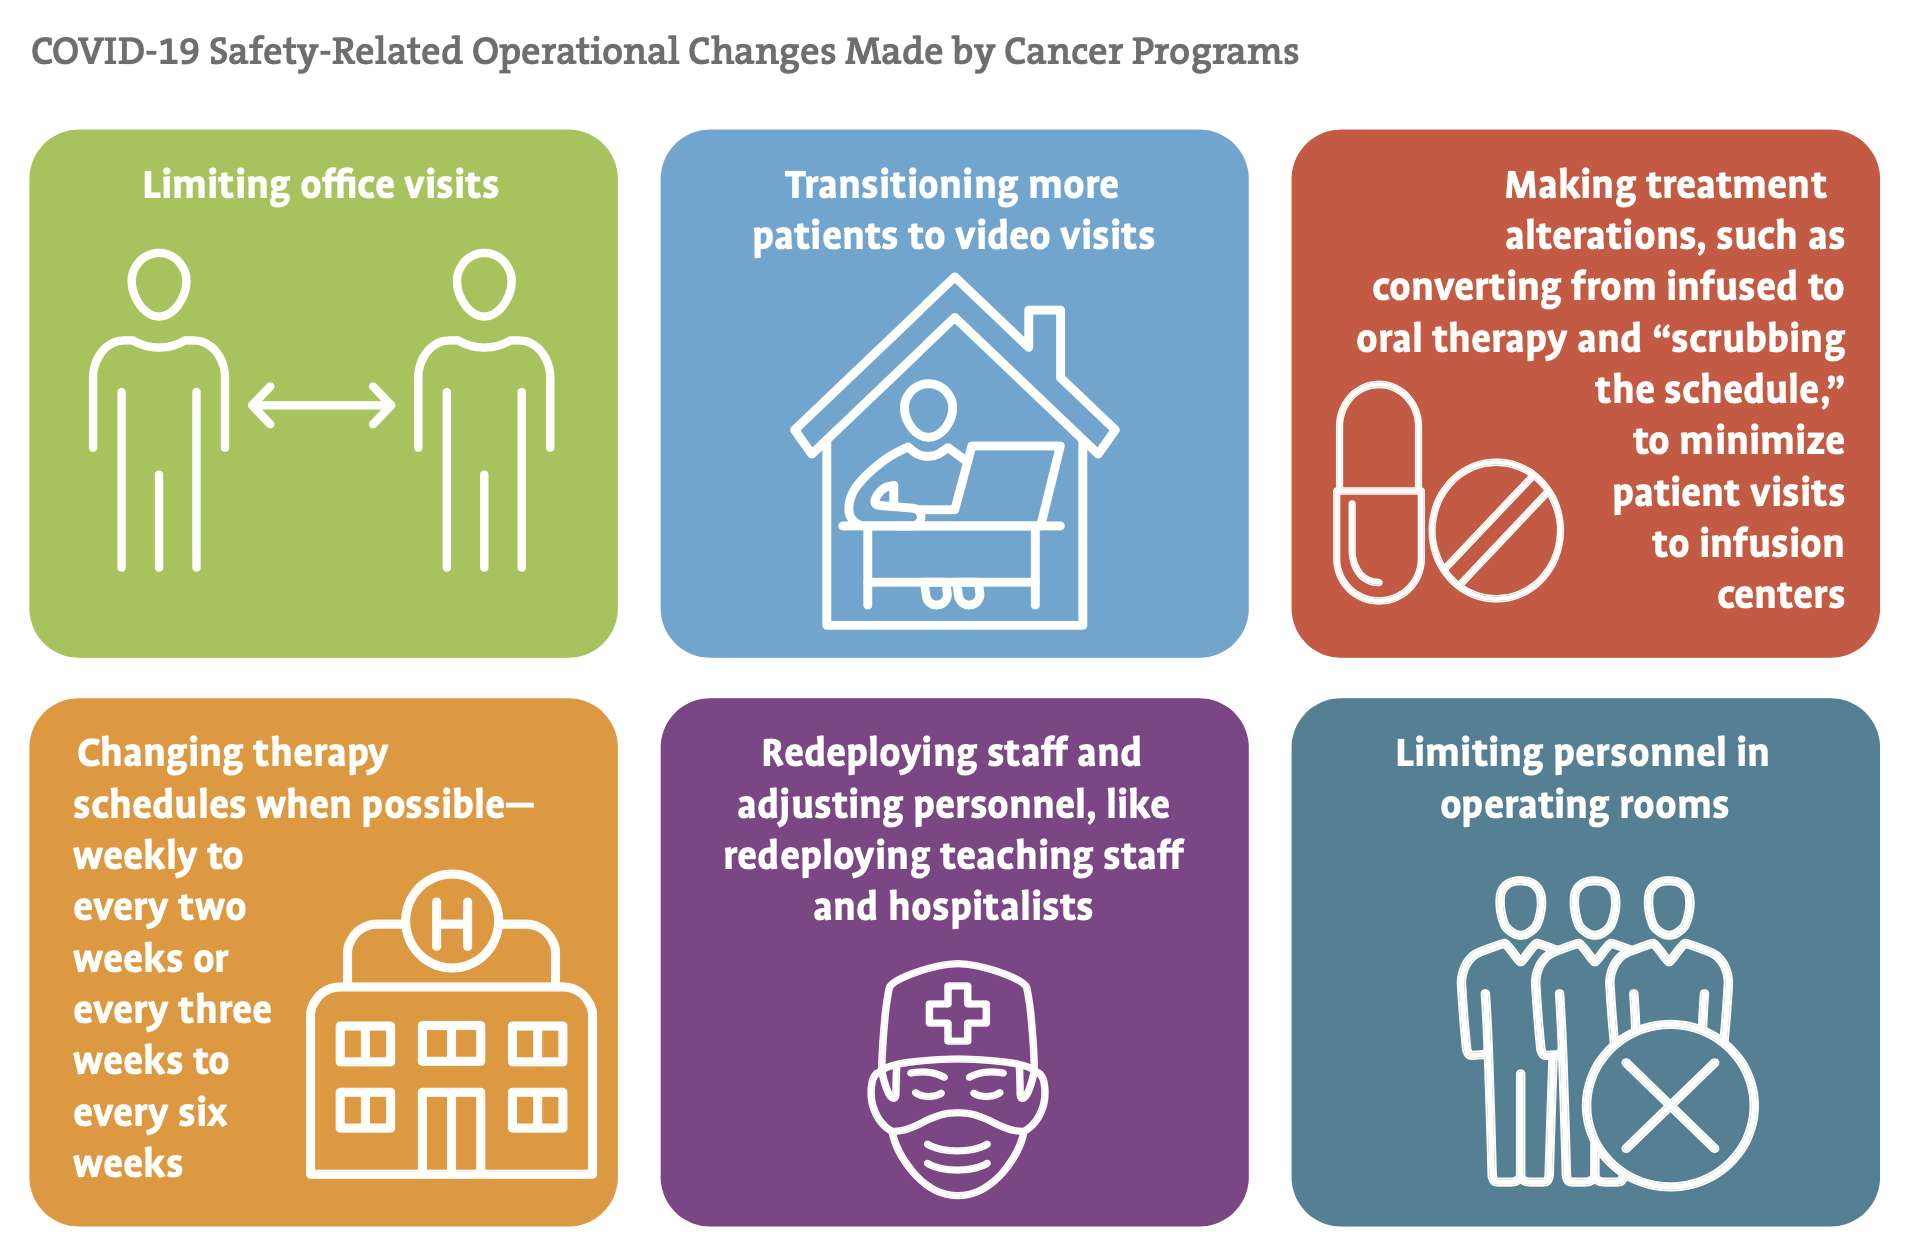 2020 Trending Now in Cancer Care Infographic 1